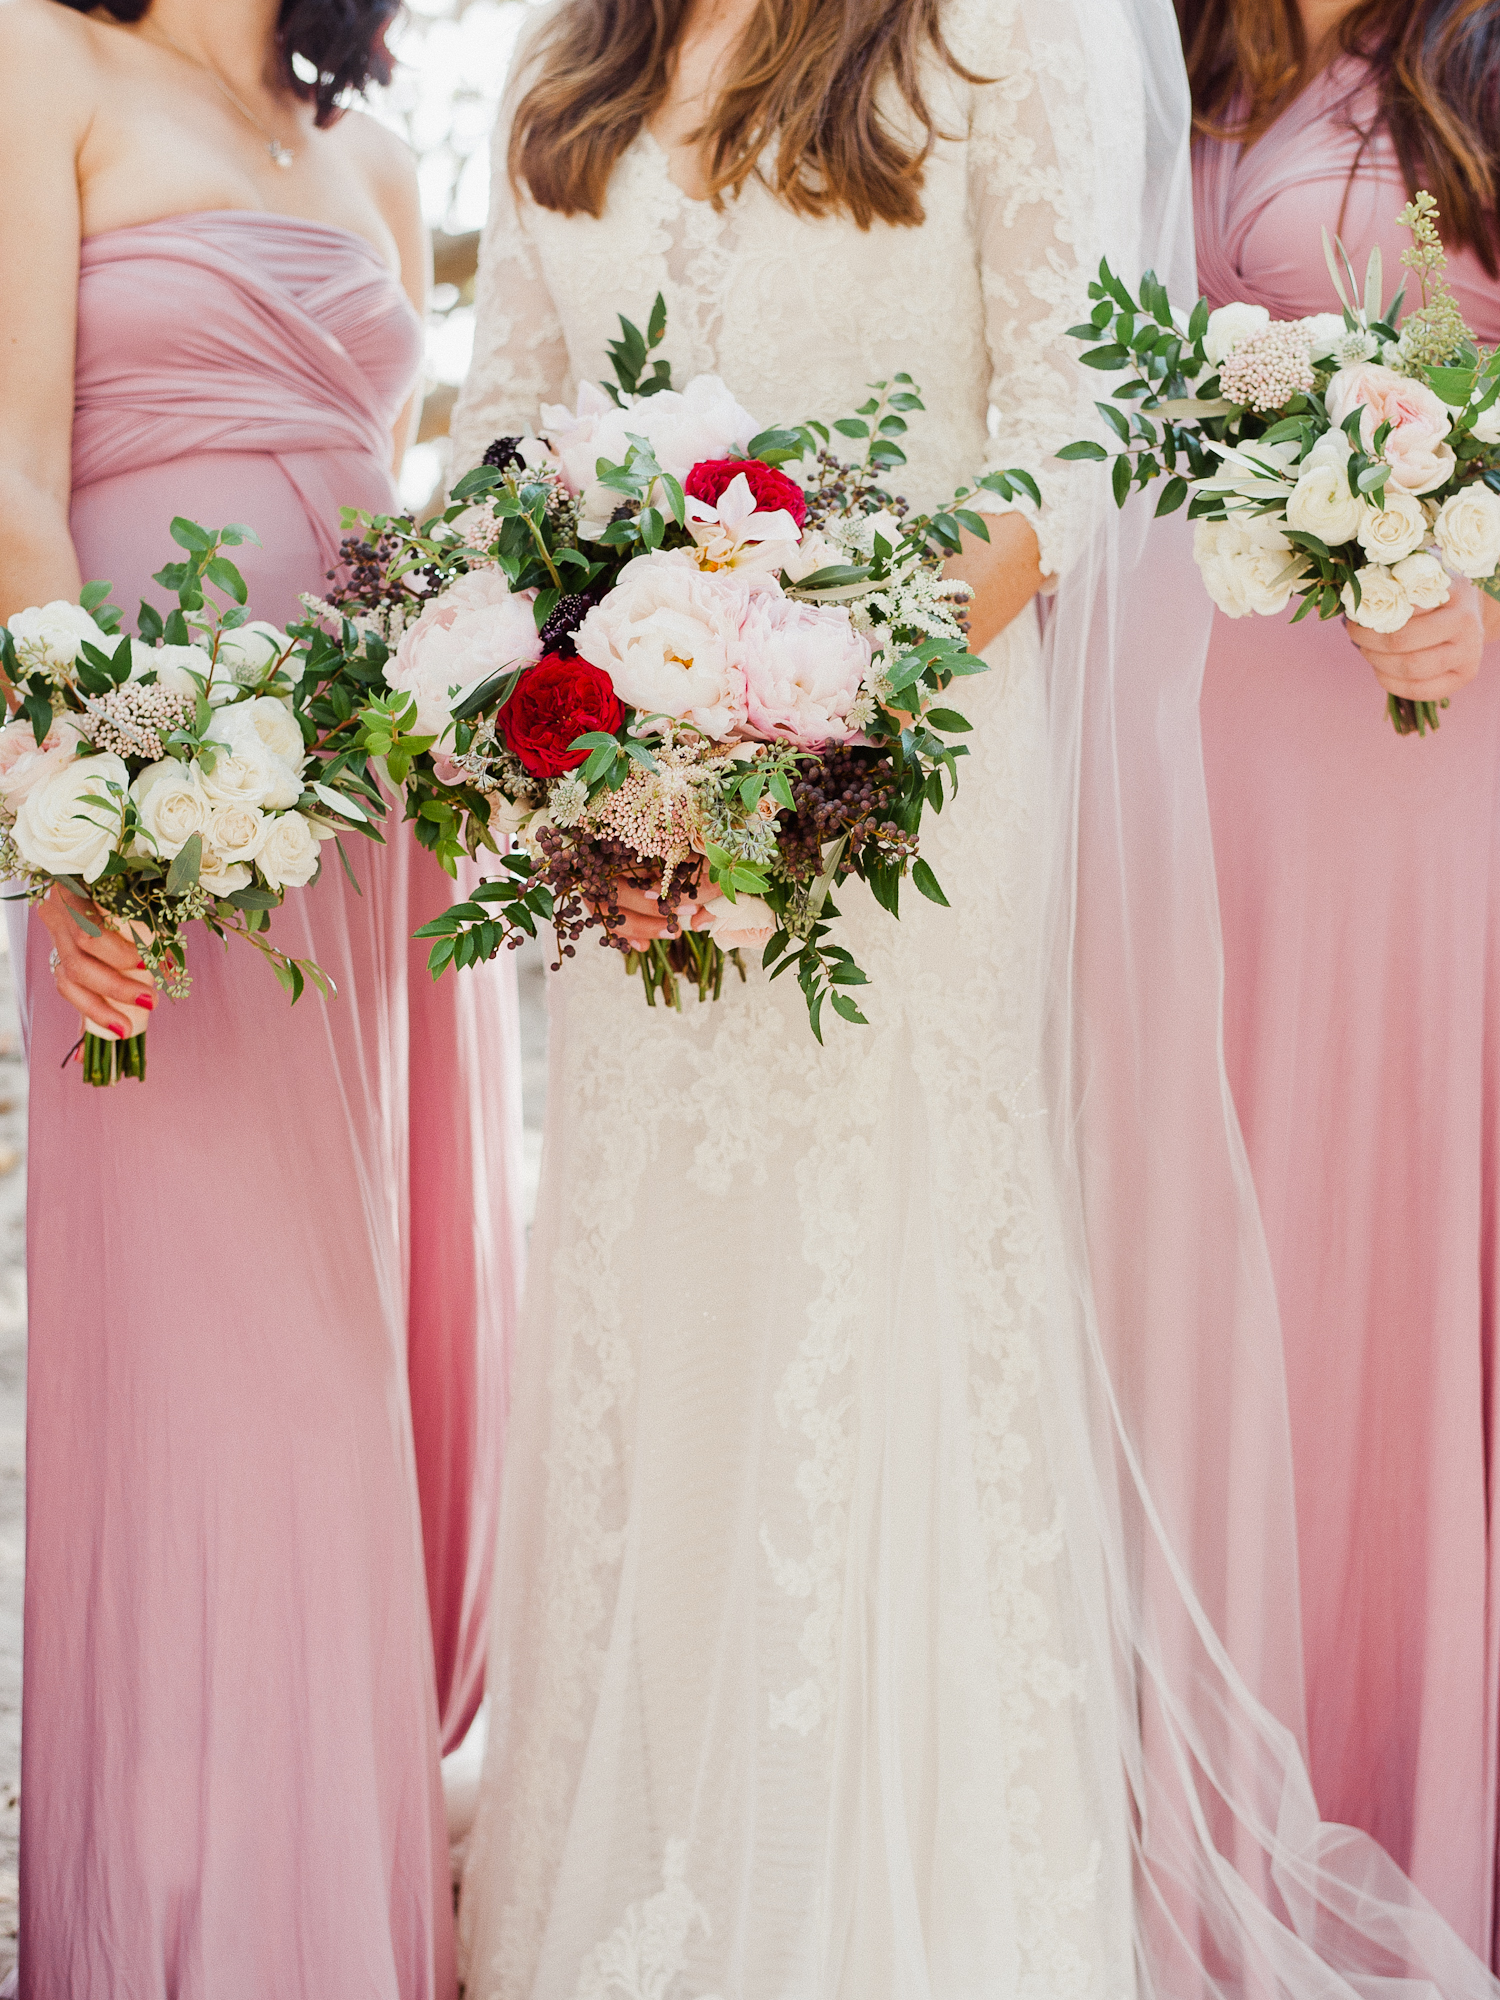 Closeup of Bride with Bridesmaids in Pink Gowns and Romantic Bouquets